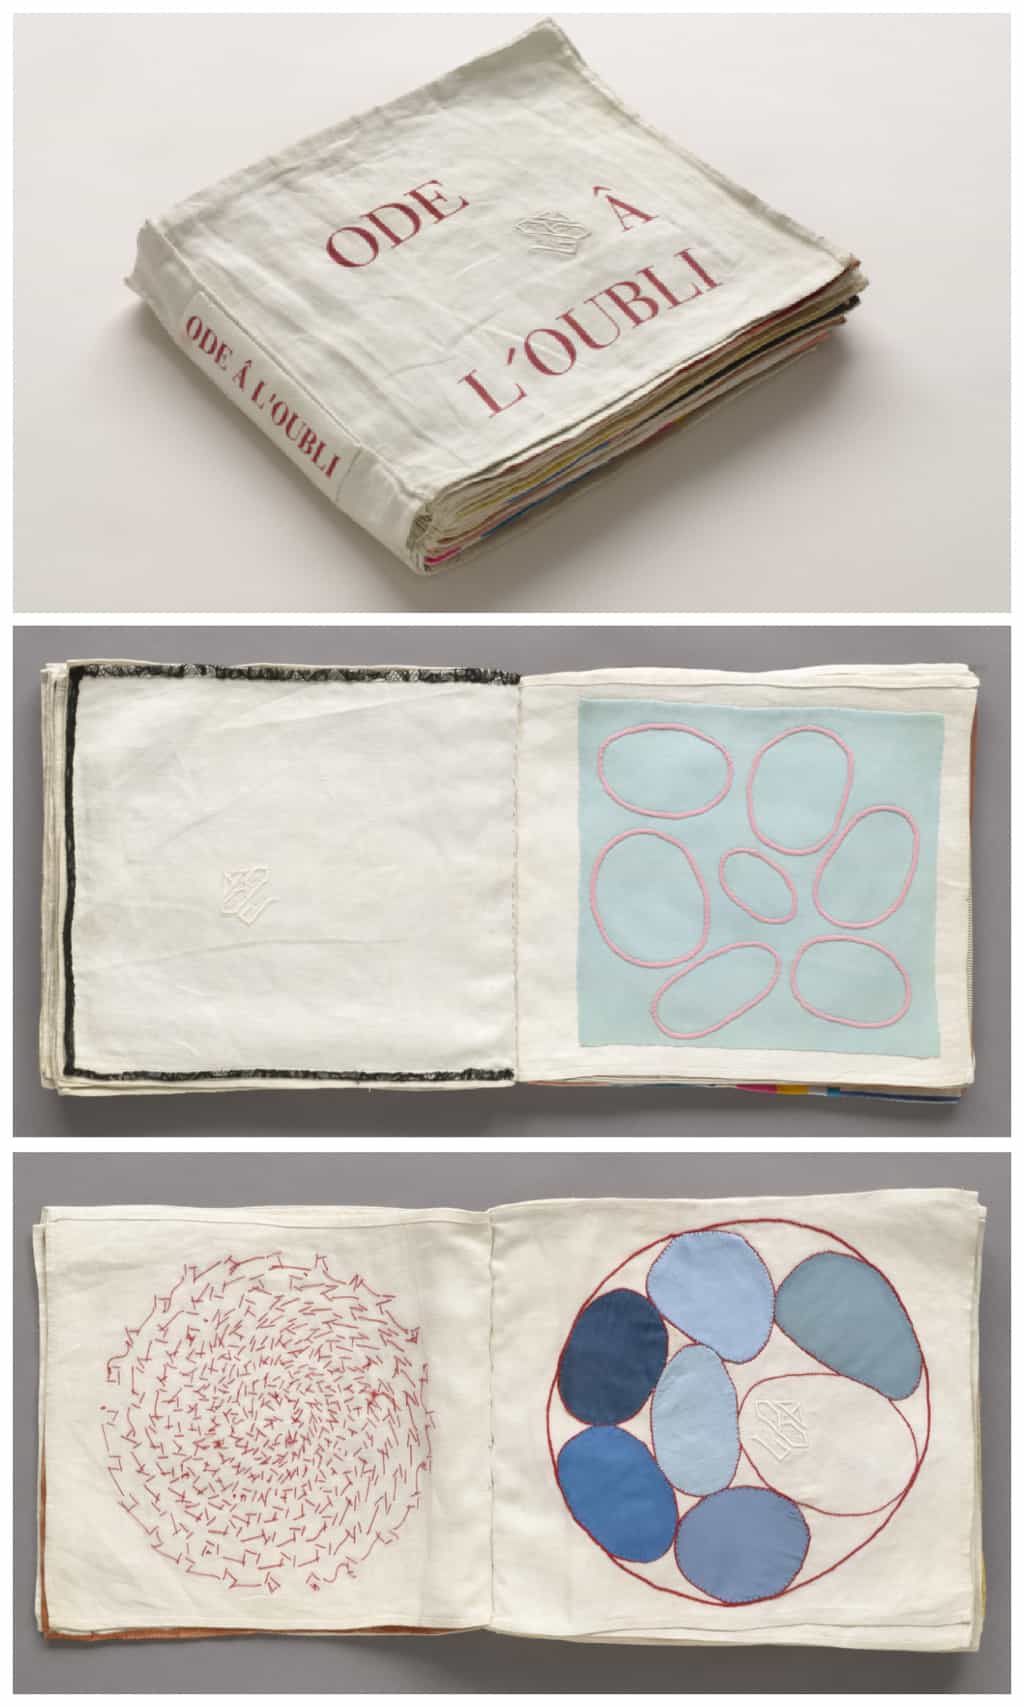 Louise Bourgeois artist's book - fabric from pieces of textiles throughout her life - cover and 2 pages - Ode A L'Oubli